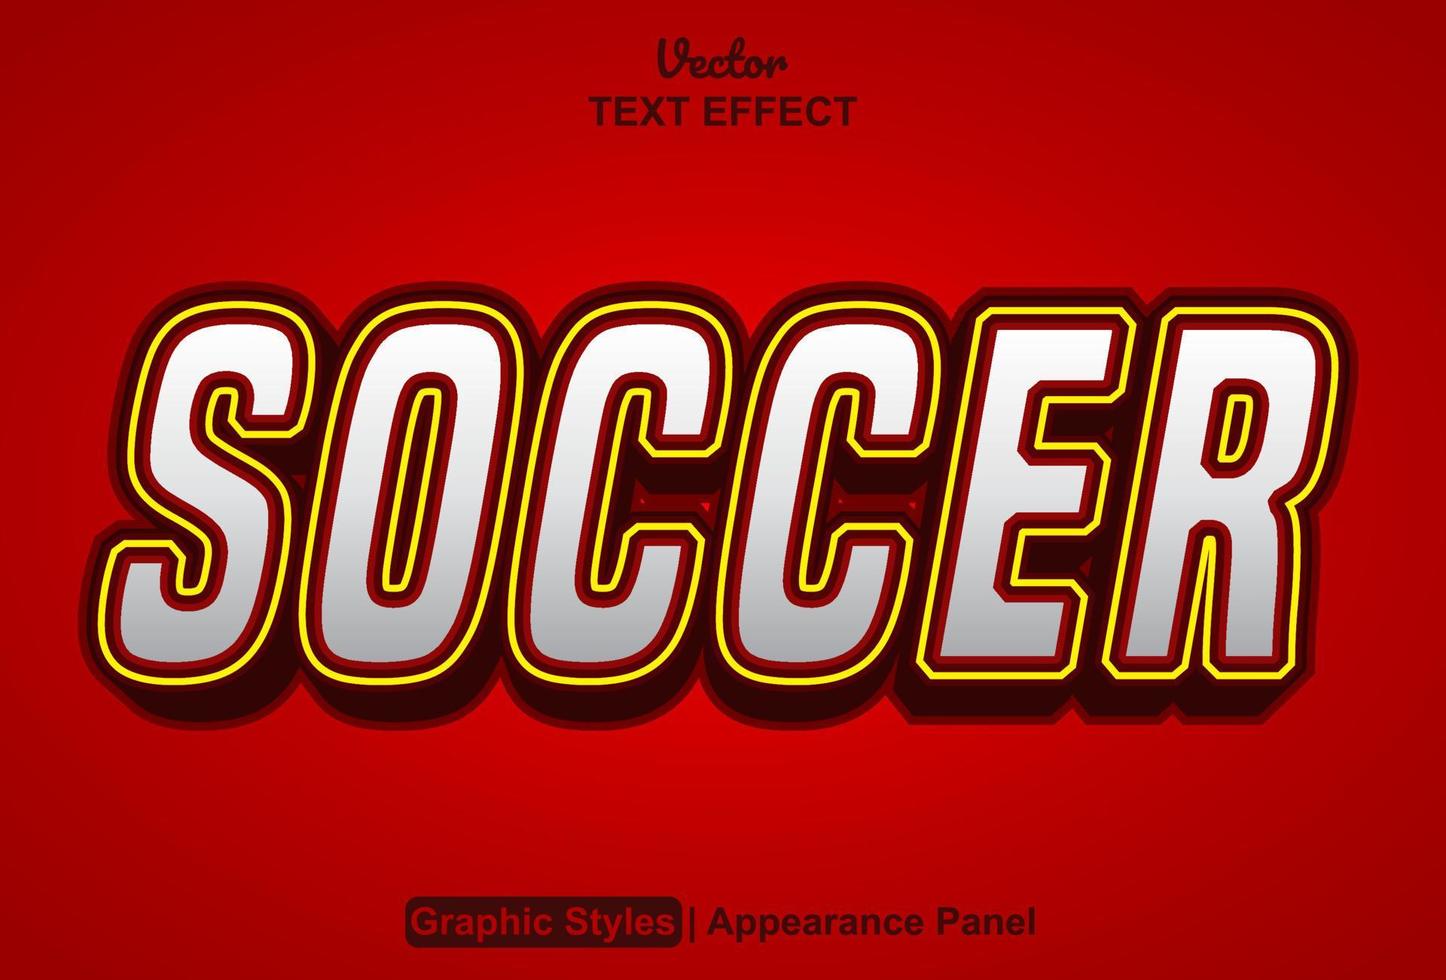 Soccer text effect with graphic style and editable. vector